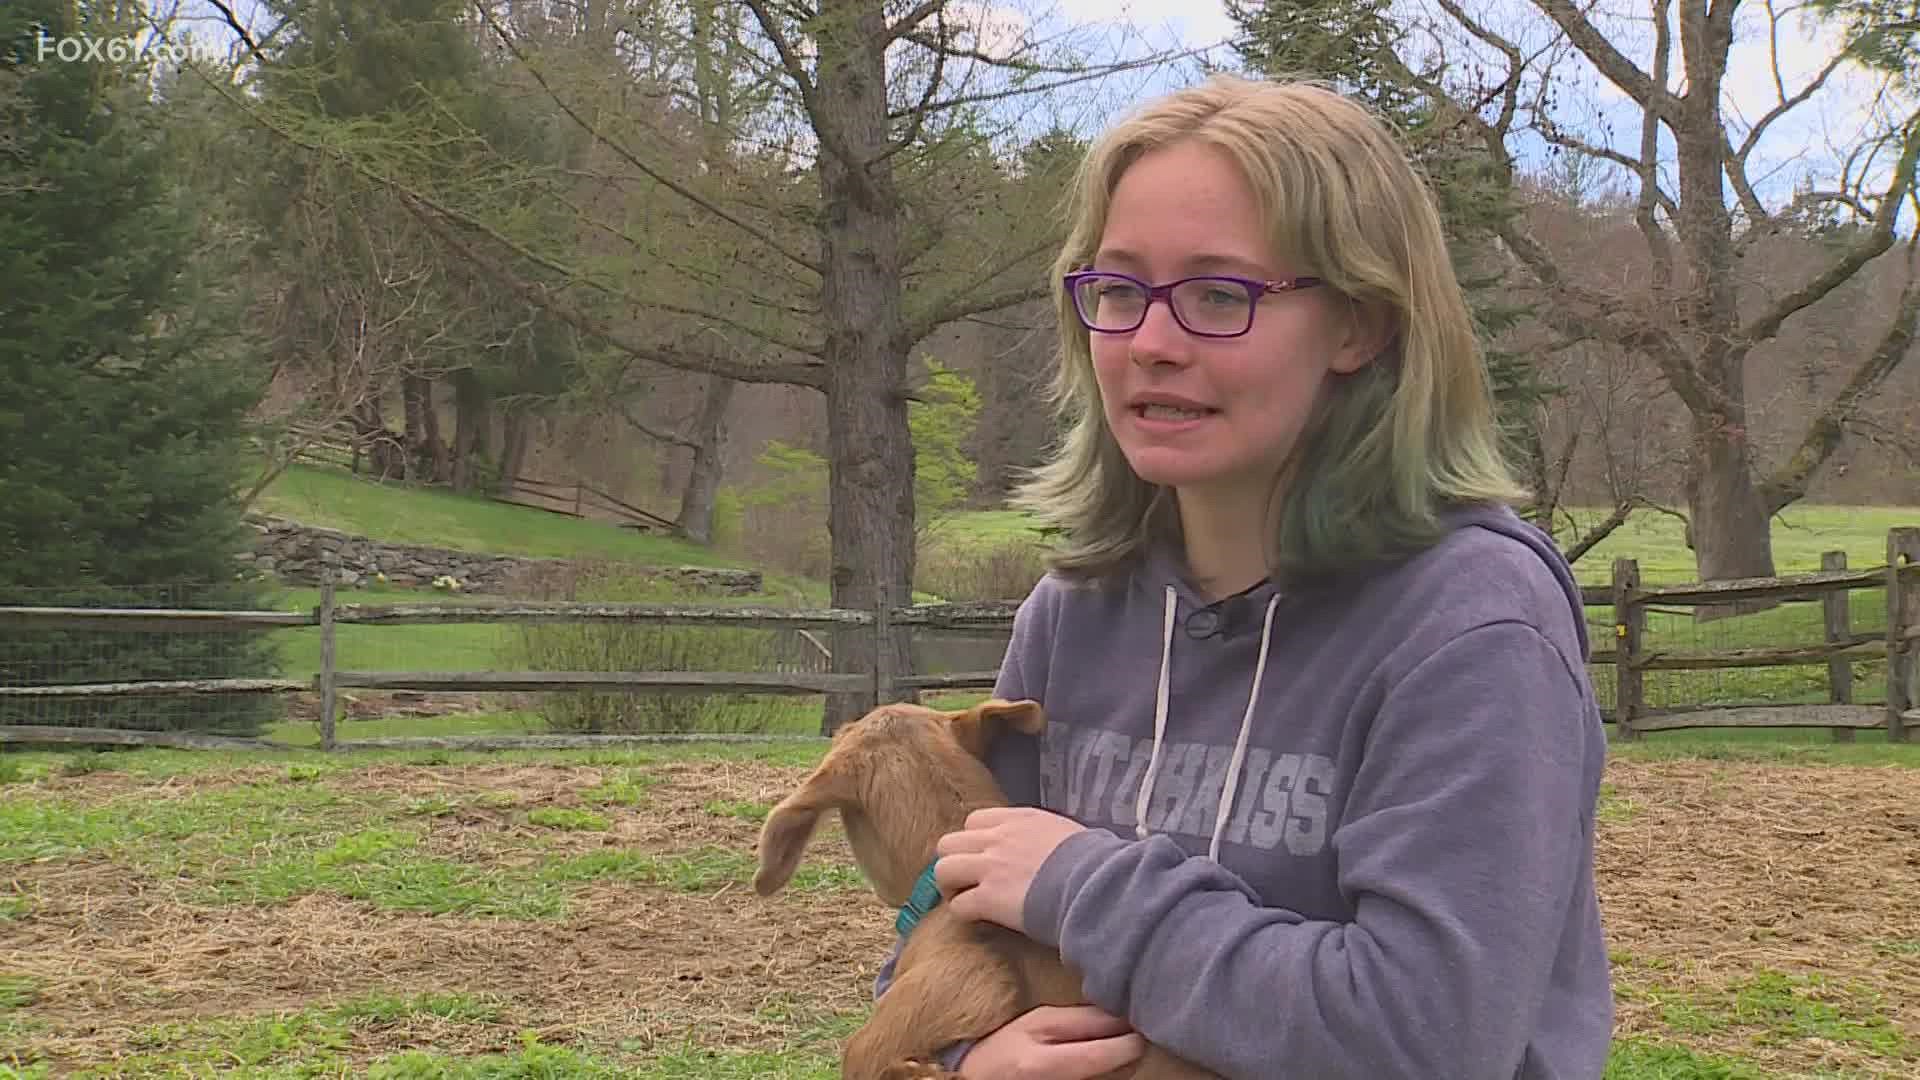 A major part of these student's school life is helping run a farm